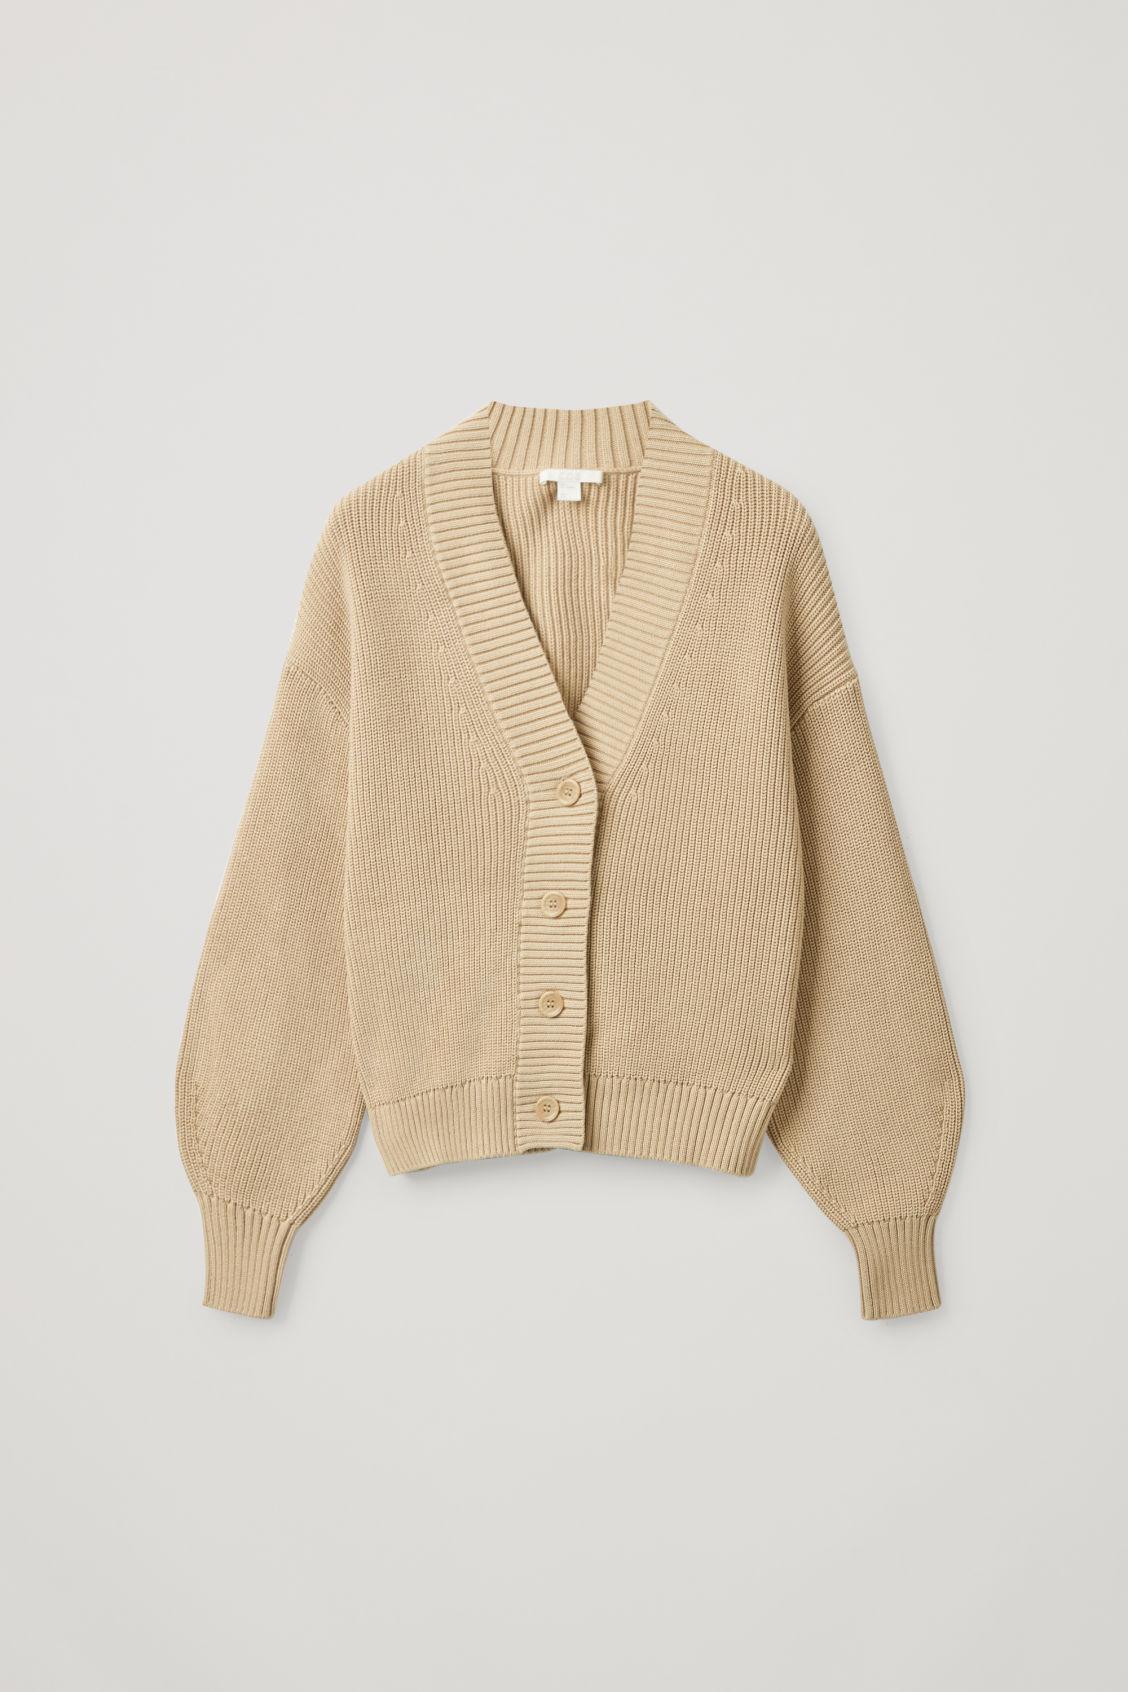 COS Cotton Oversized V-neck Cardigan in Beige (Natural) - Lyst